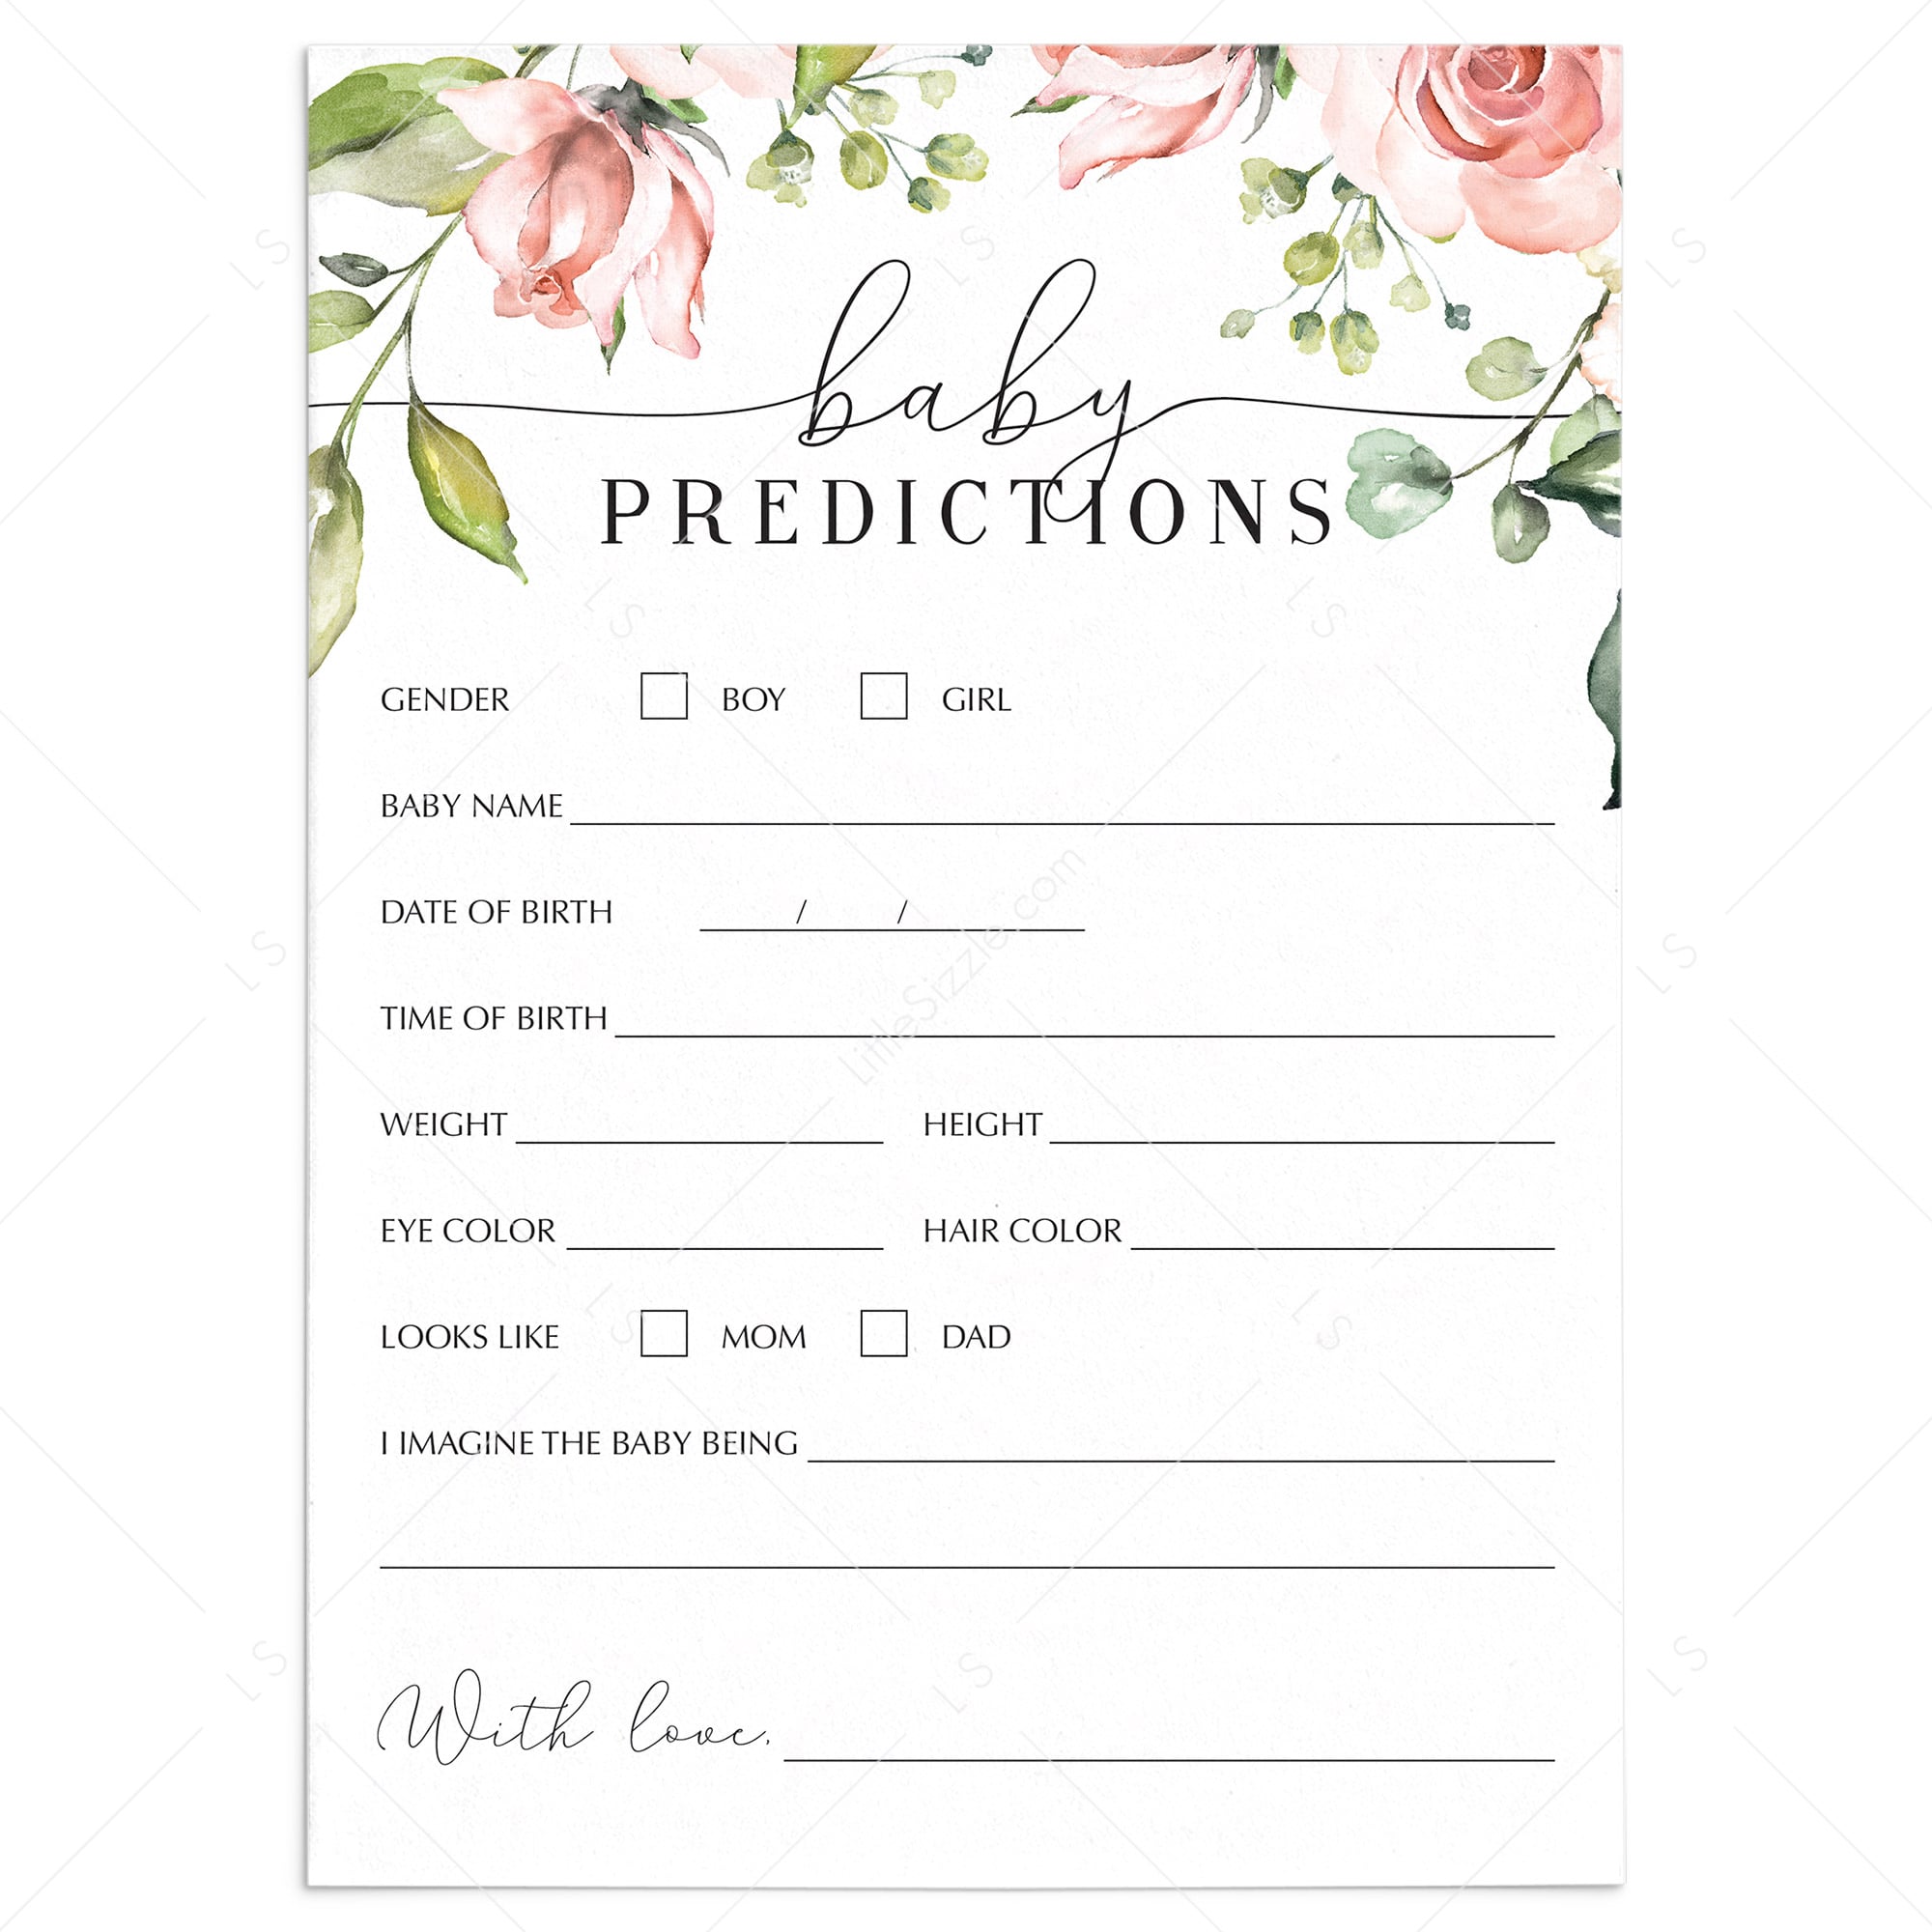 Baby predictions guessing game for baby shower by LittleSizzle